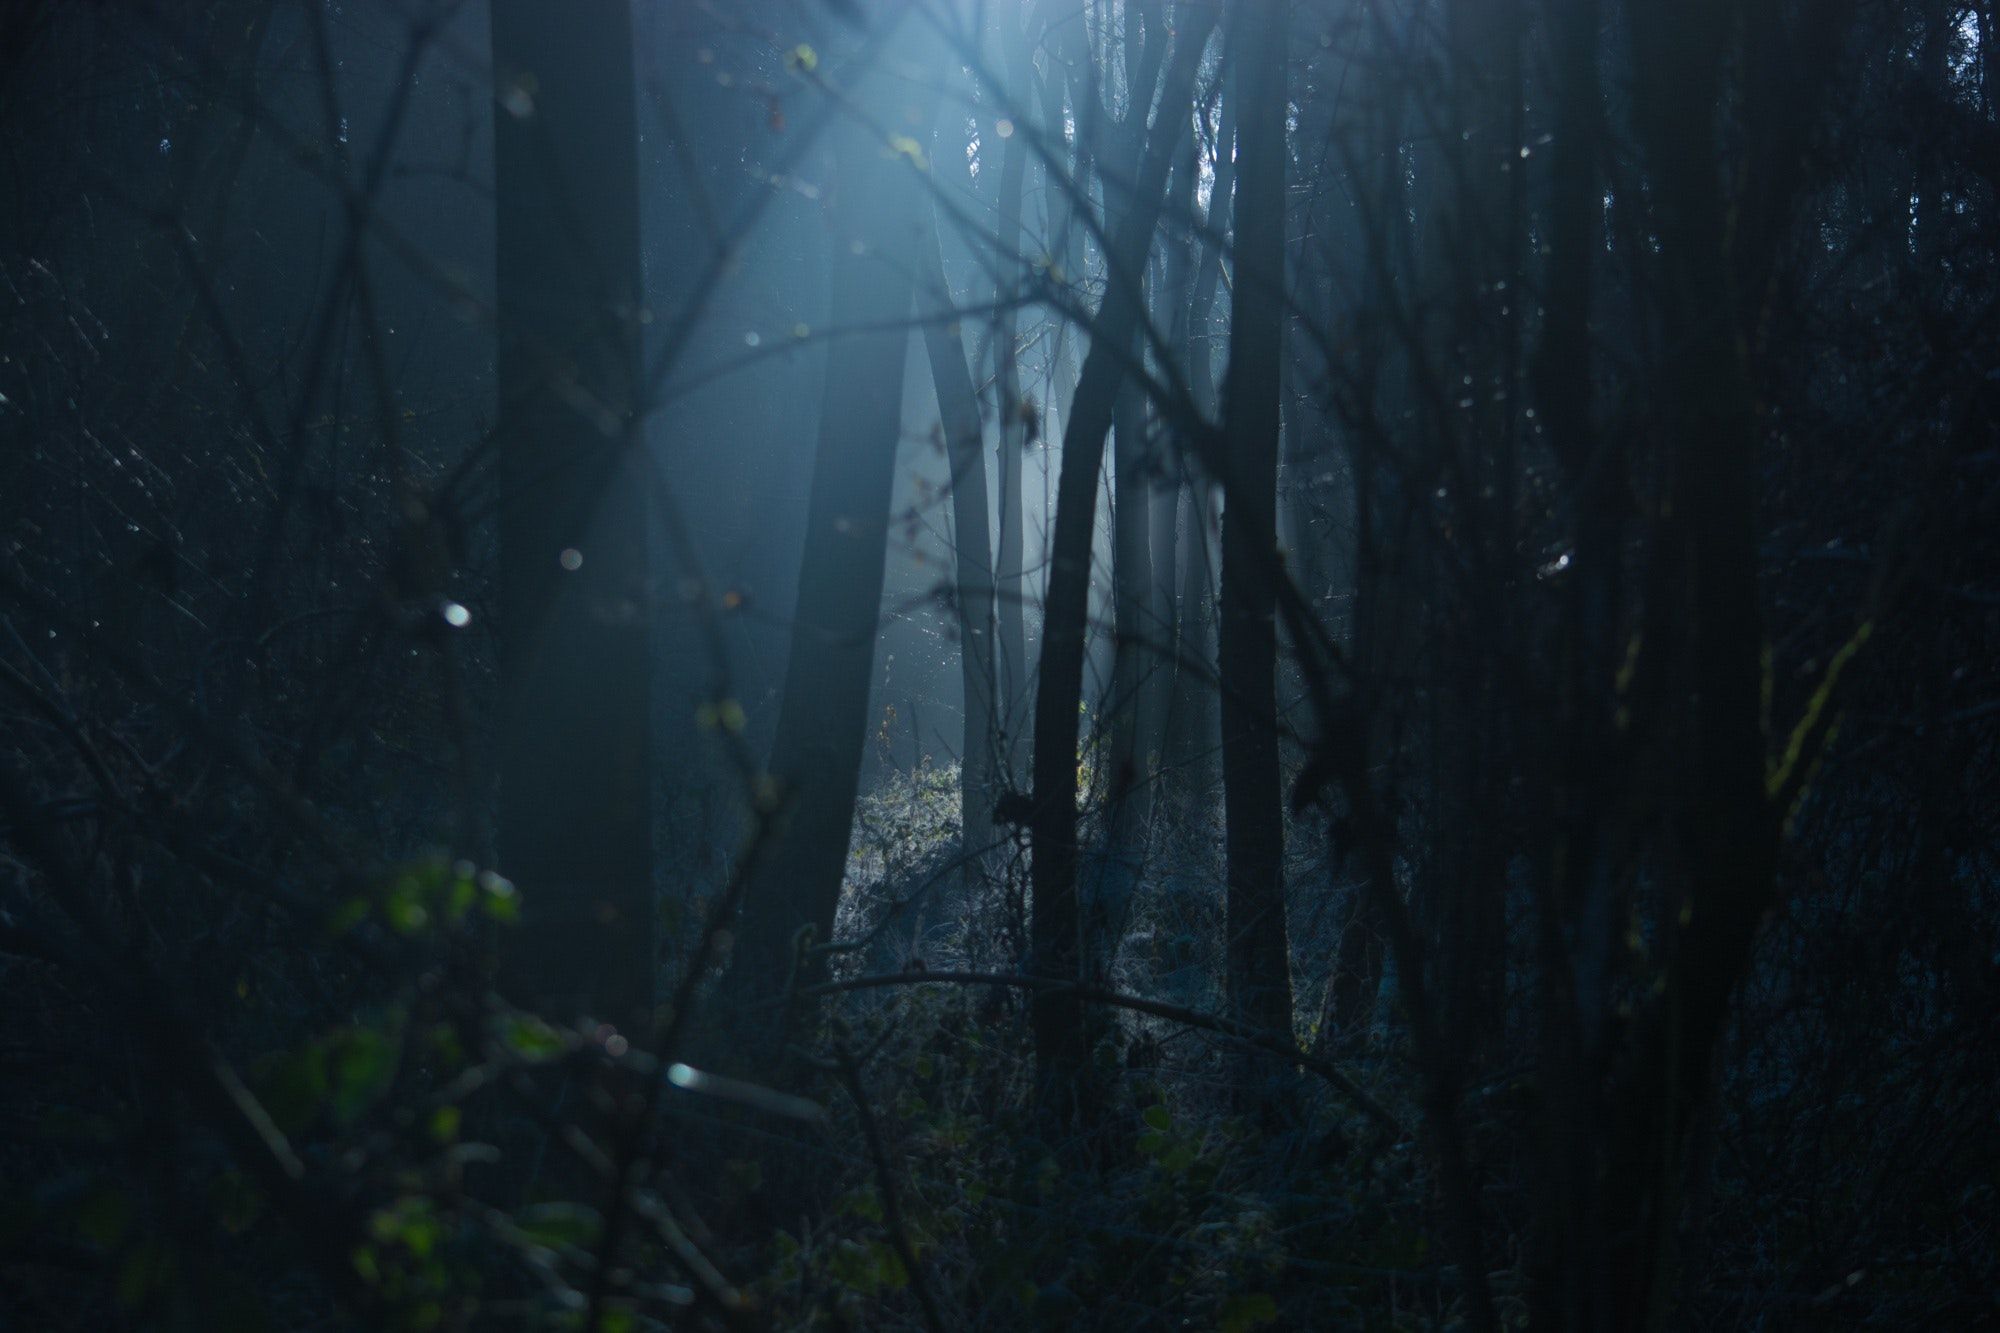 Scary Deep Dark Forest Pictures 
width 240 
height - Dark Forest - HD Wallpaper 